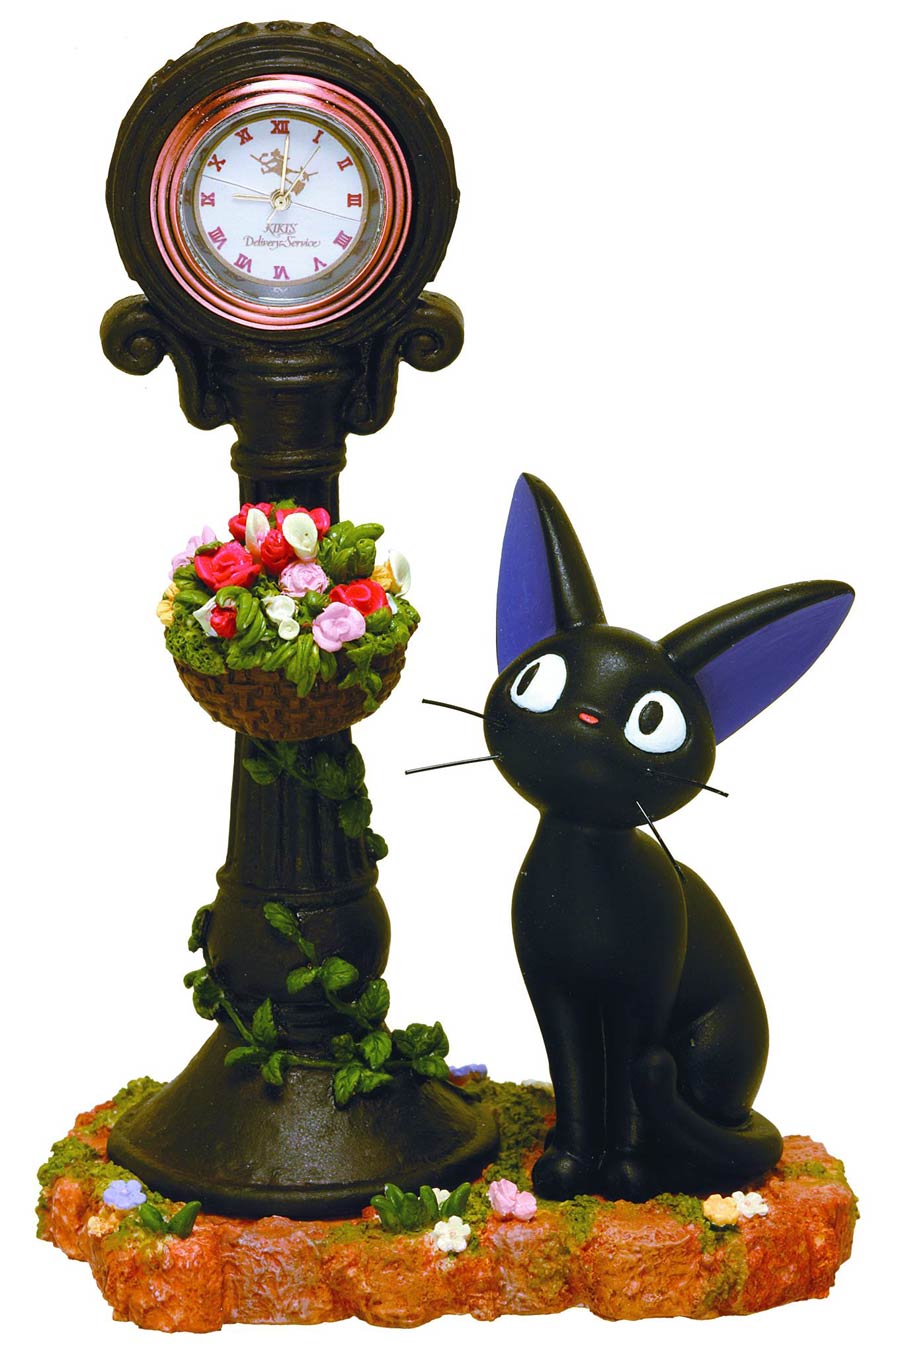 Kikis Delivery Service Diorama Style Clock - Box Of 3 - Jijis In Town